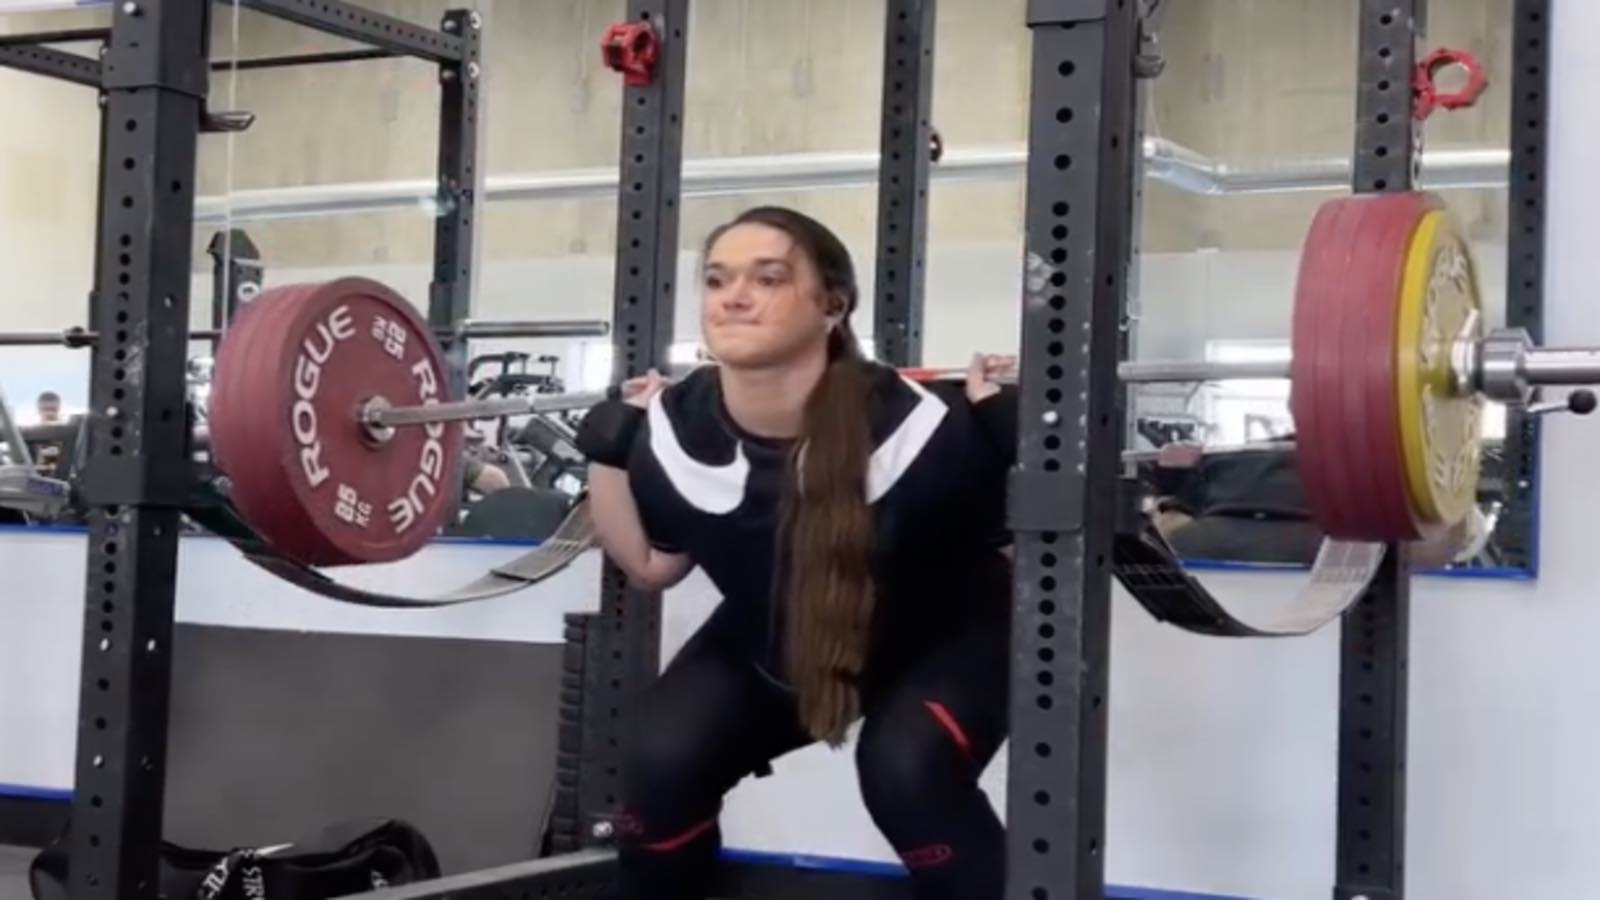 amanda-lawrence-(84kg)-squats-115-kilograms-(25.3-pounds)-more-than-ipf-world-record-in-training-–-breaking-muscle